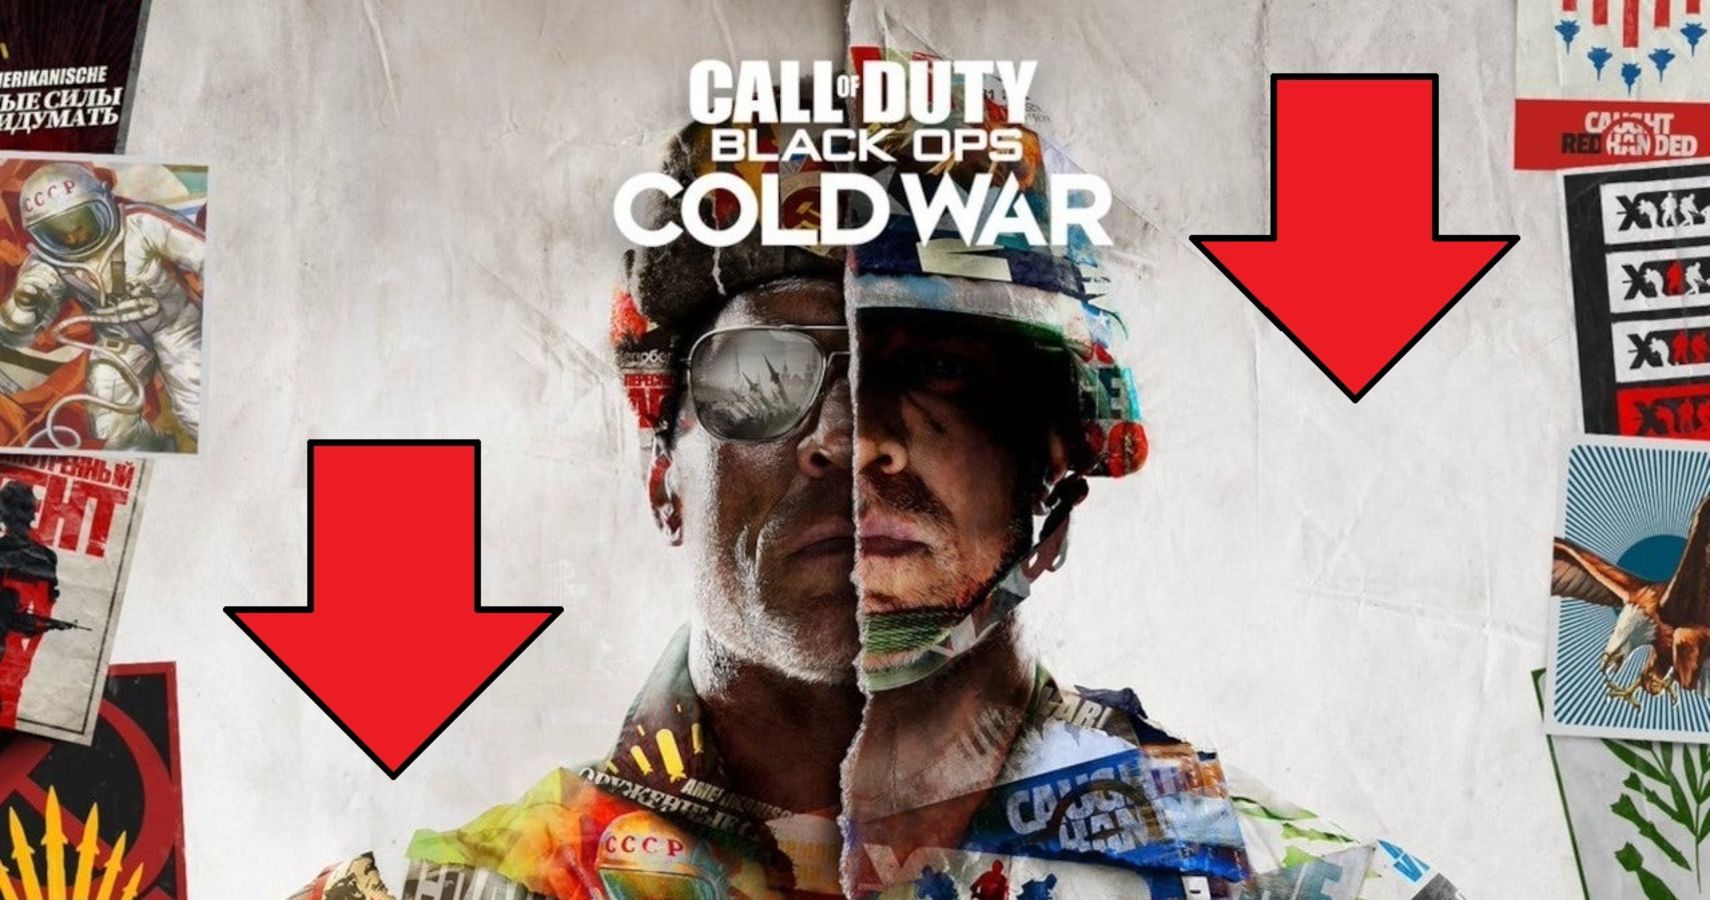 Call Of Duty Black Ops Cold War S User Score On Metacritic Is Brutally Low